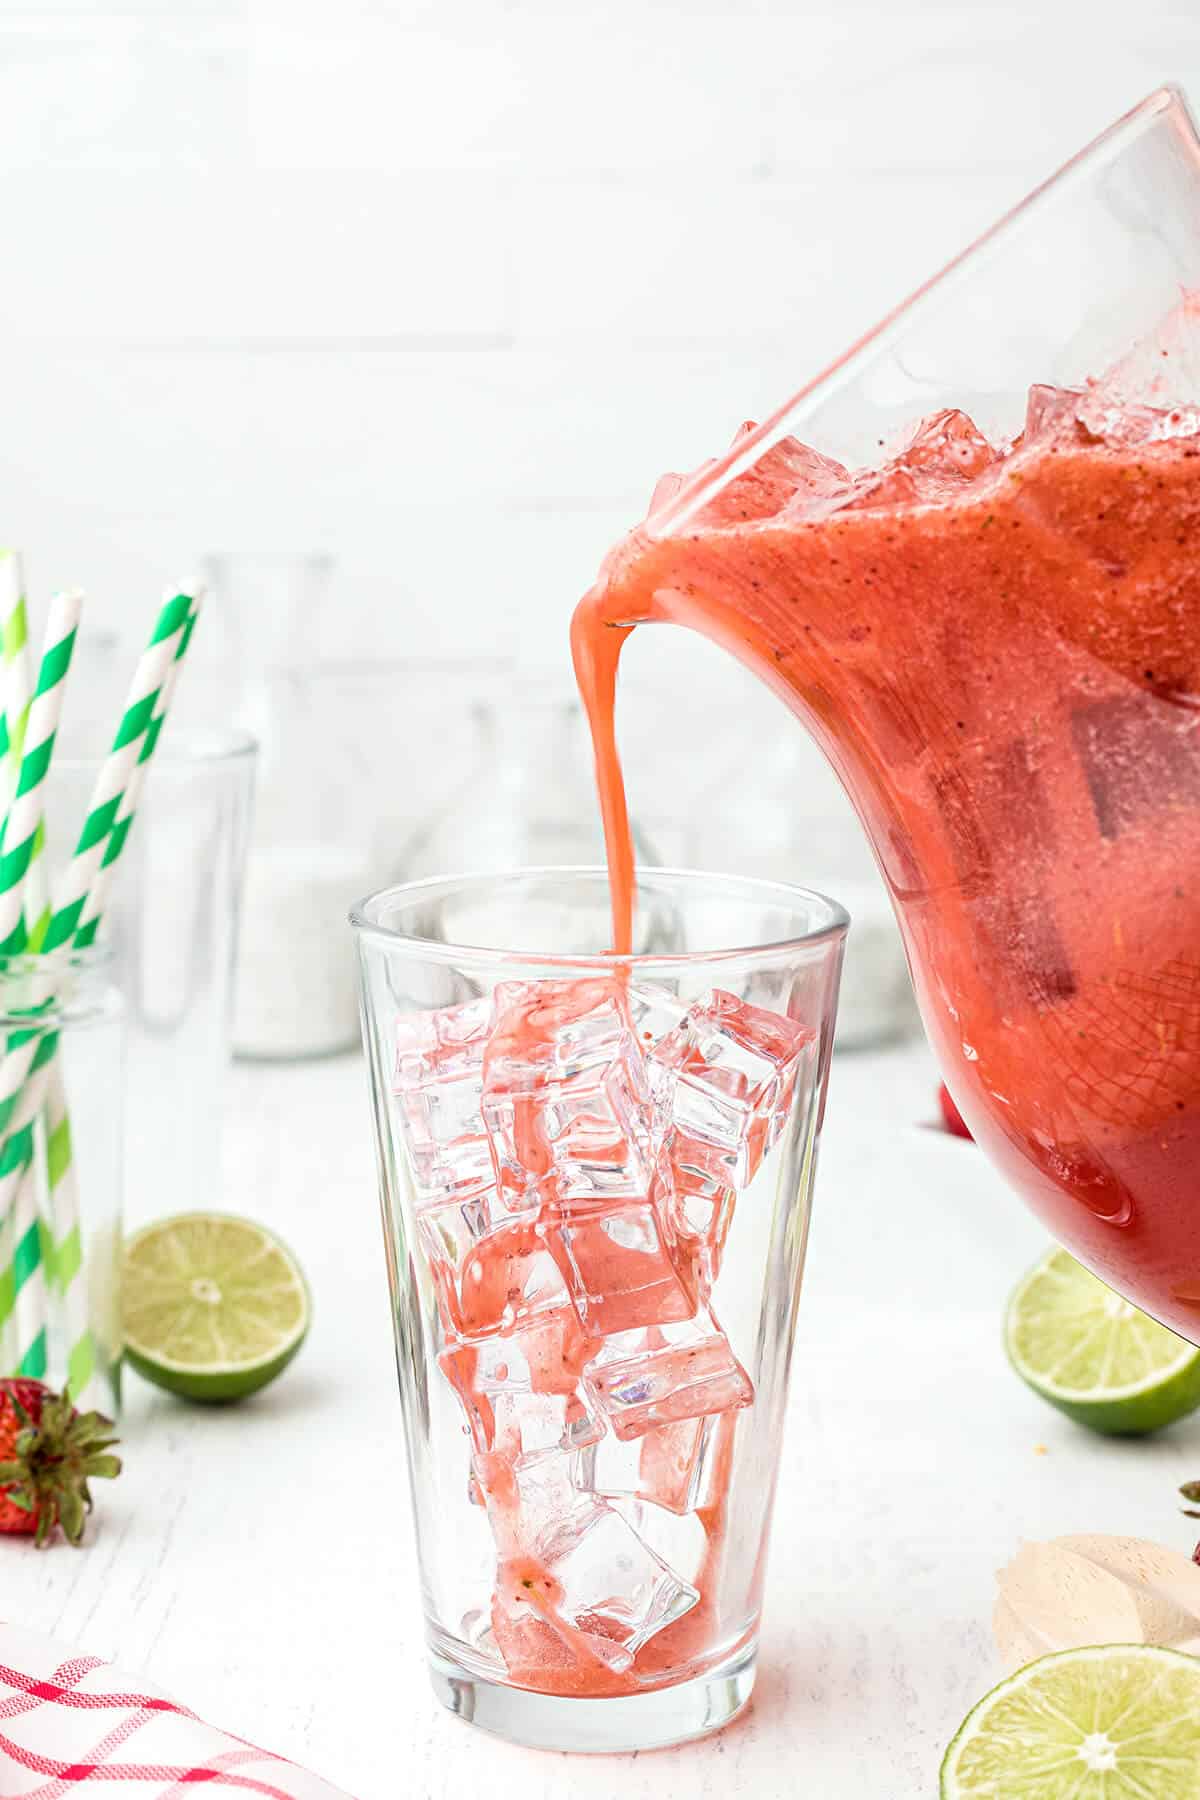 Strawberry lemon limeade being poured from a pitcher into a glass filled with ice.